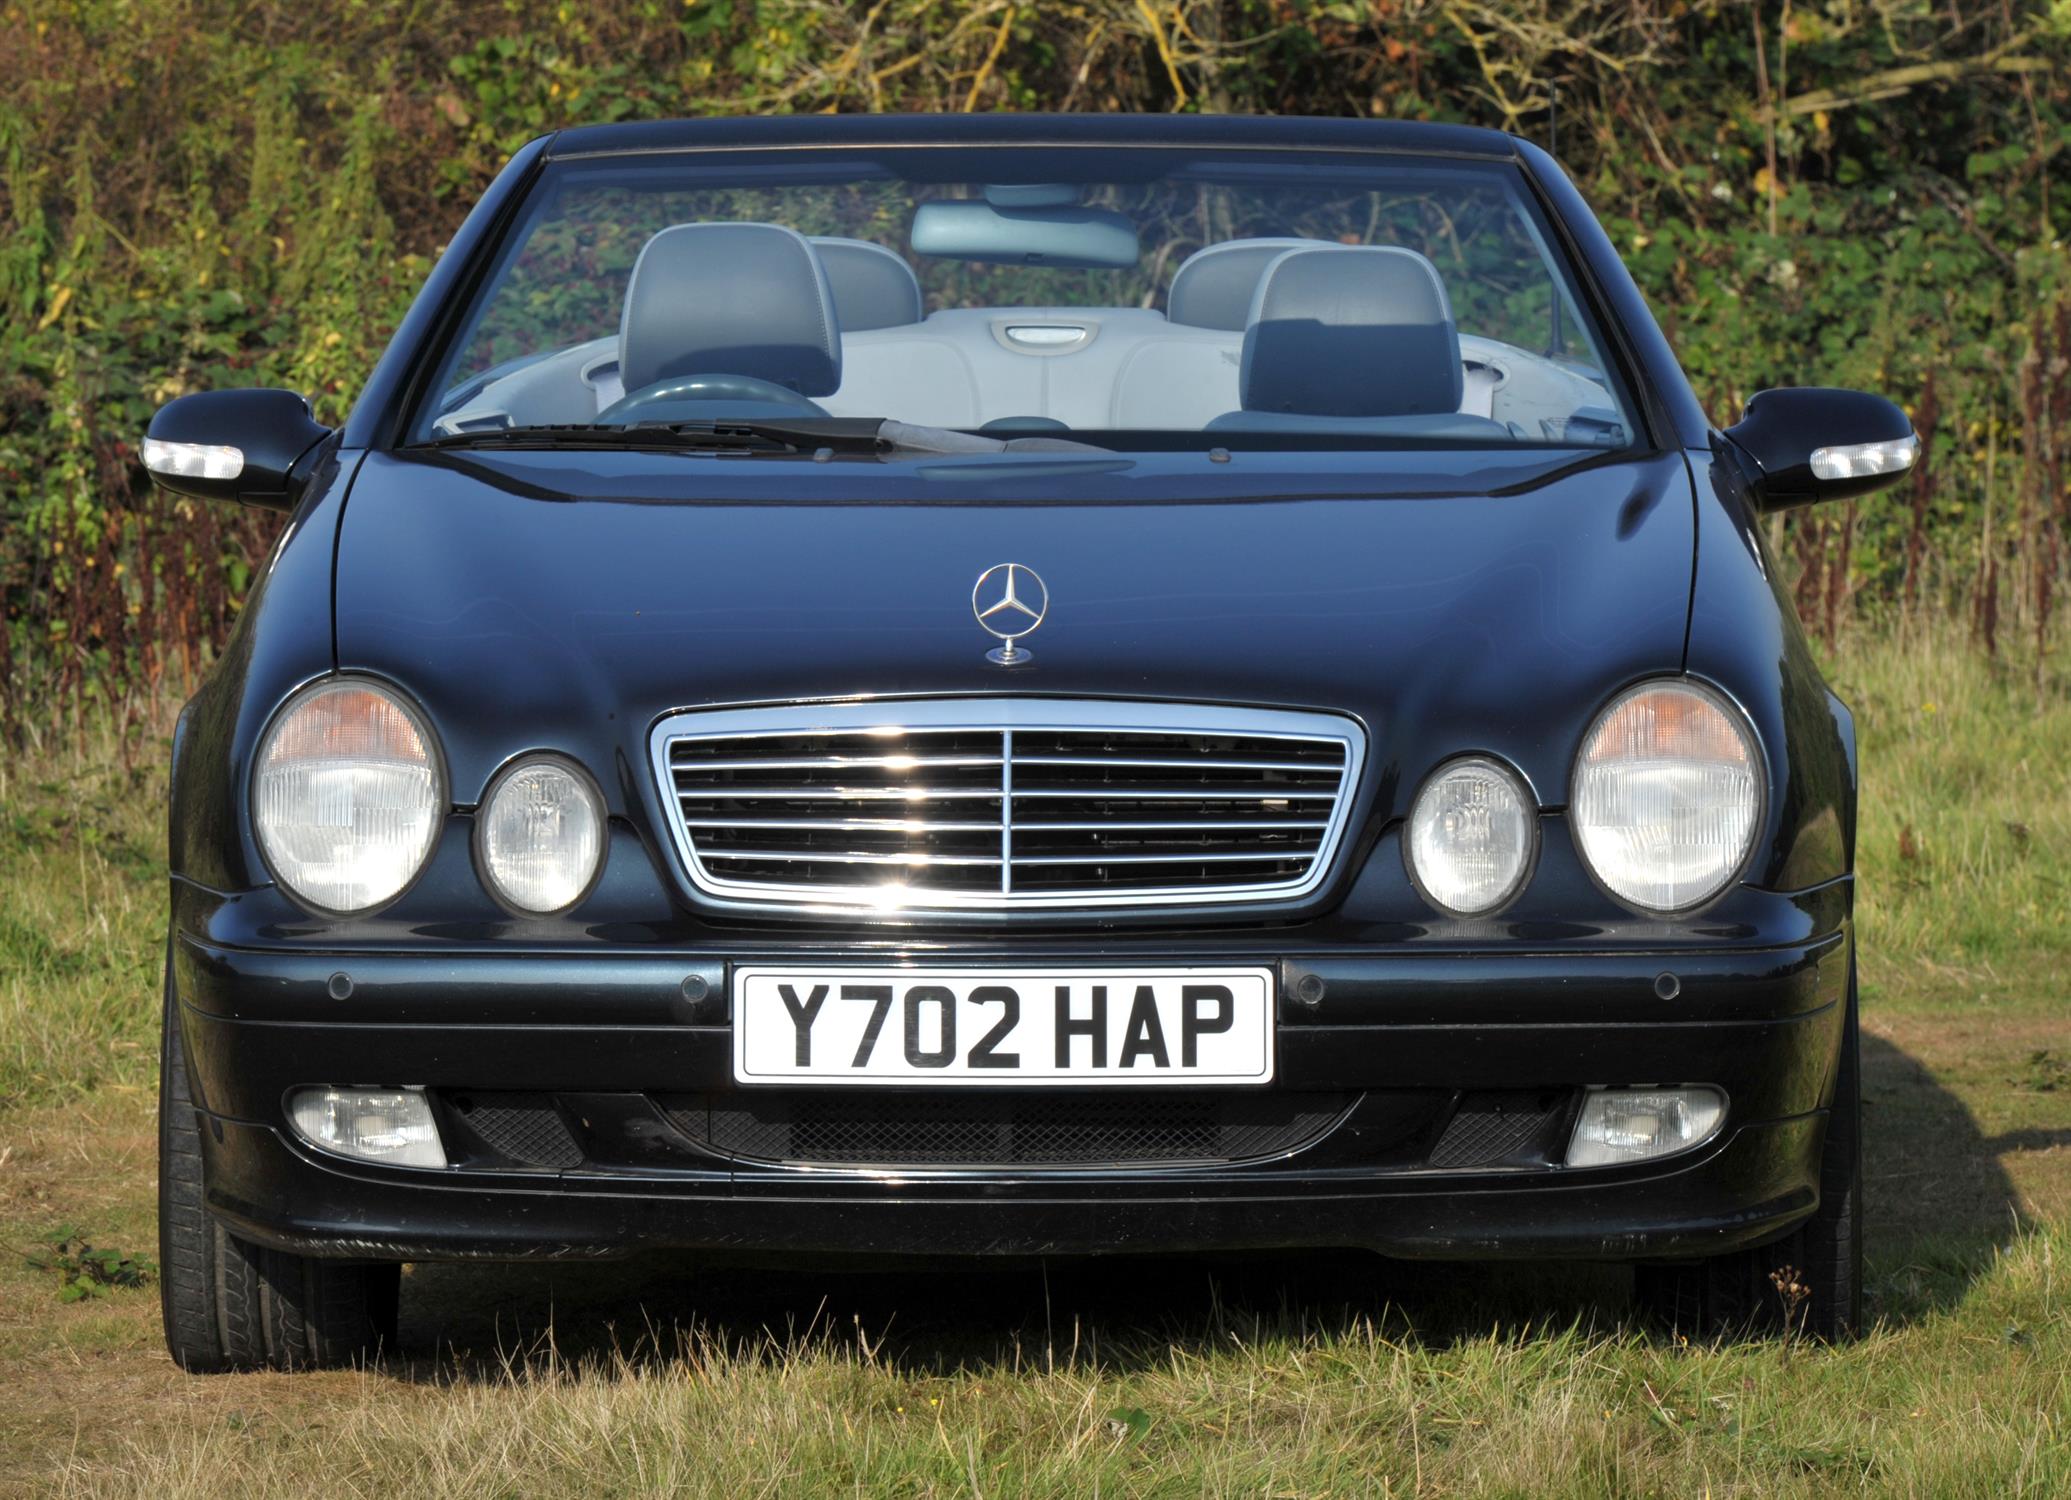 2001 Mercedes CLK 200 Petrol Convertible Automatic. Registration number: Y702 HAP. - Image 15 of 21